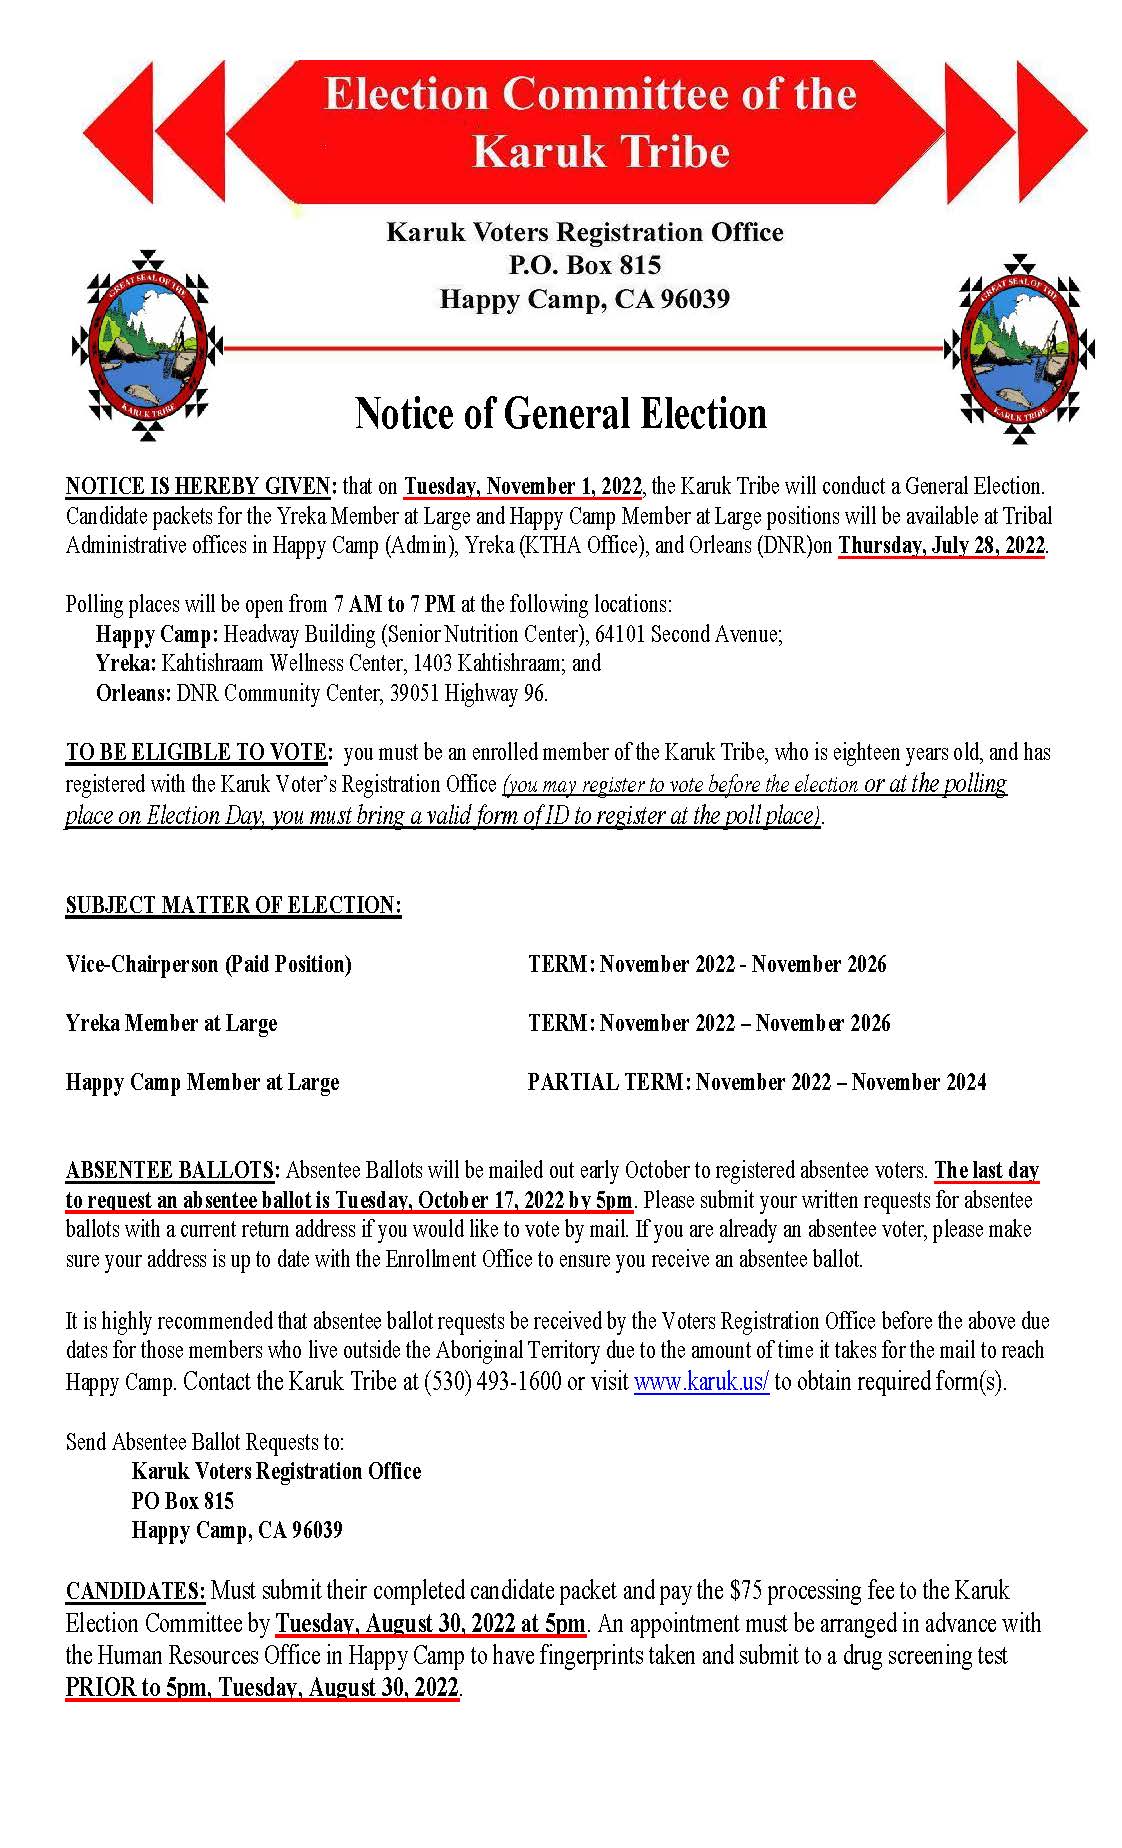 2022 Notice of General Election flyer 7.27.22 MS